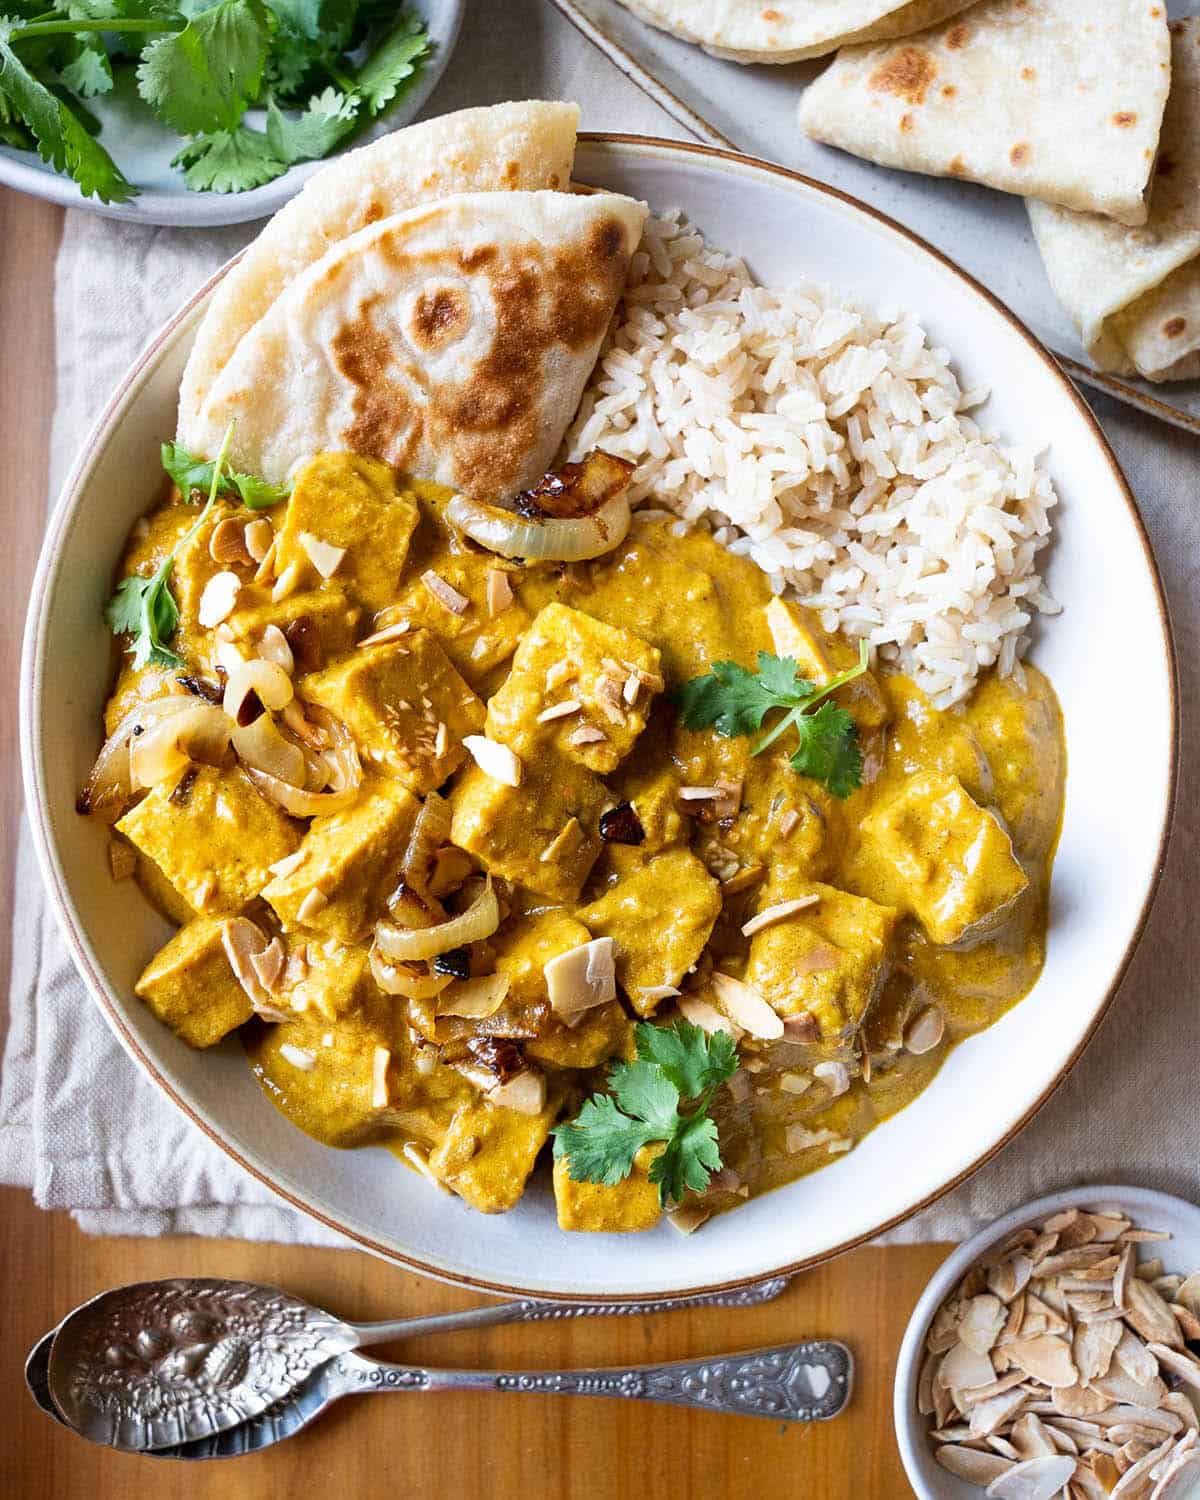 Tofu korma in a bowl with rice and a roti on the side.